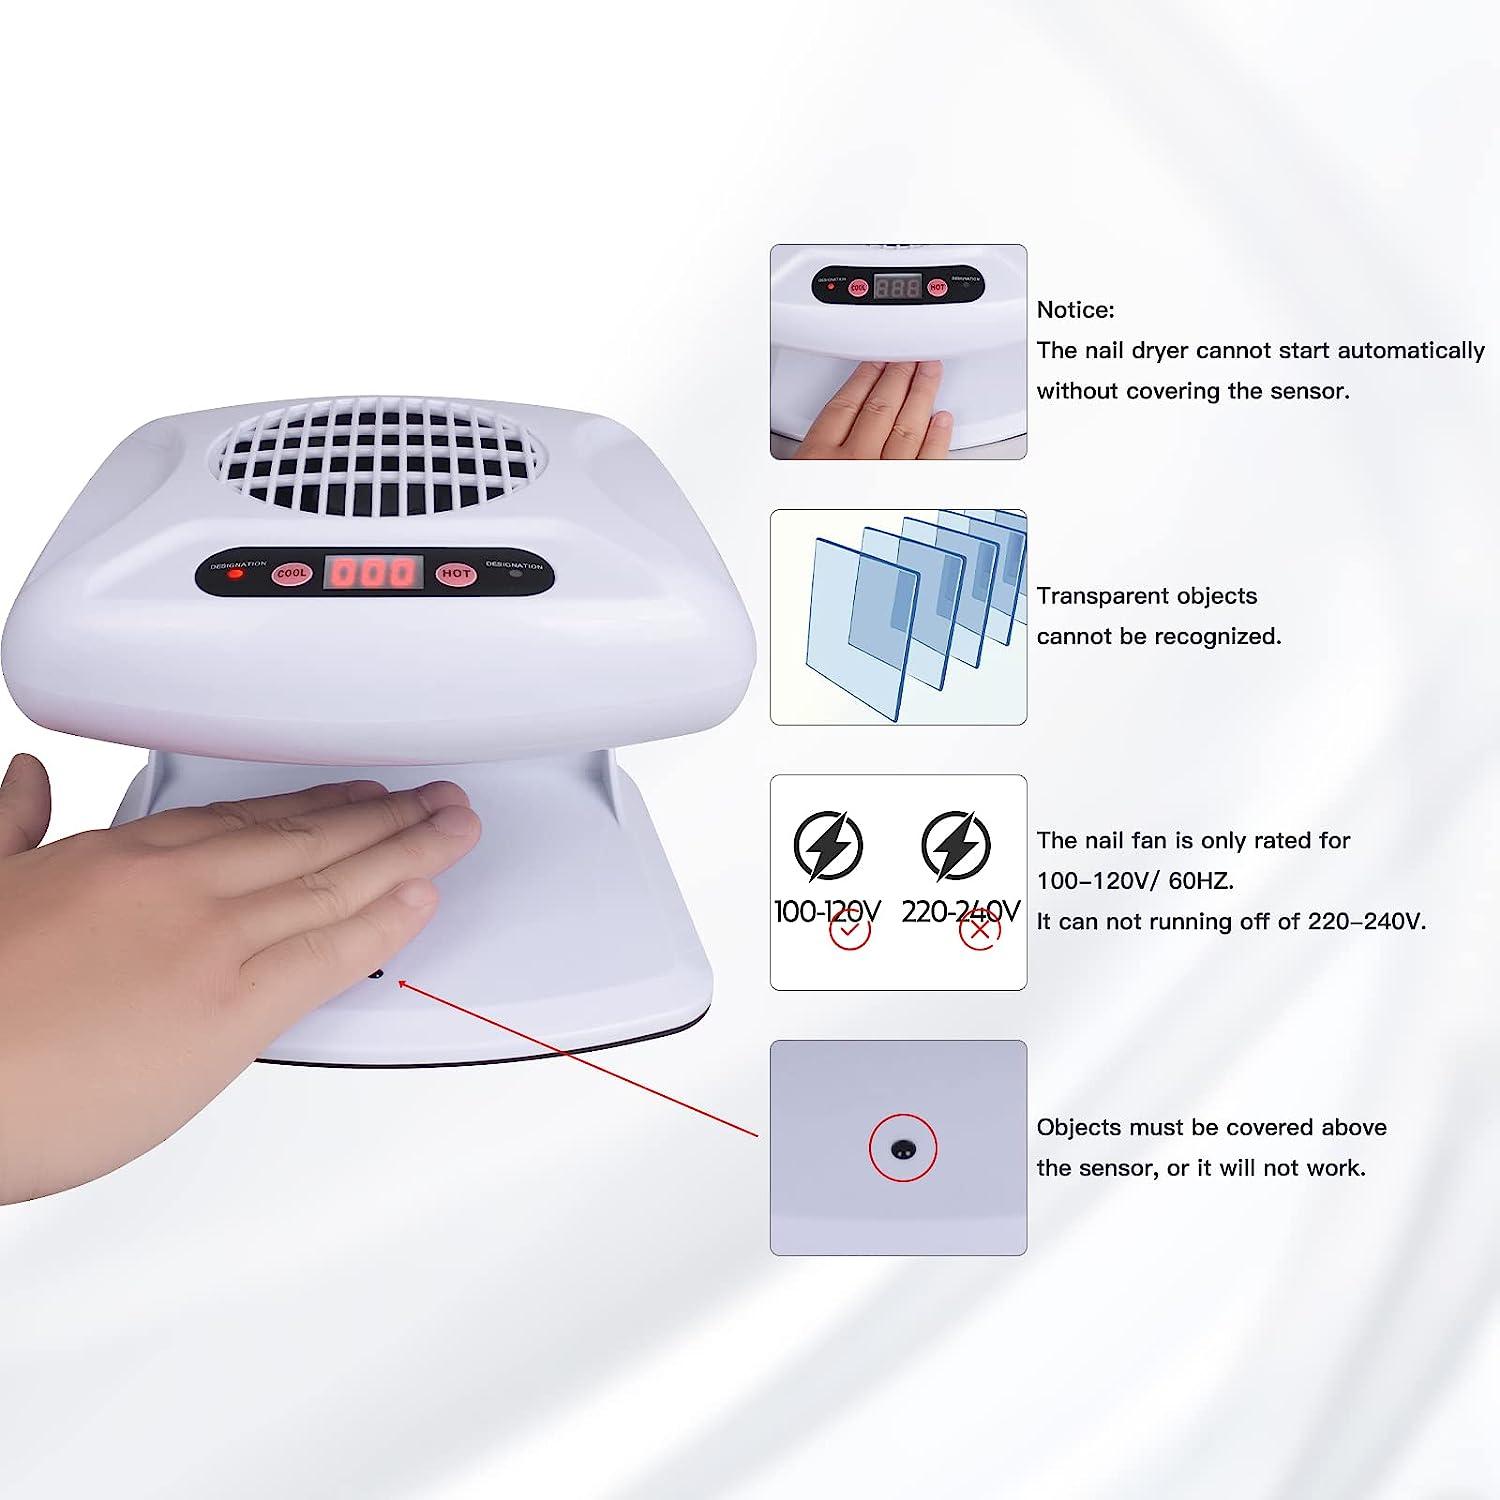 Nail Dryers Cold Air Dryer Manicure Cleaner Warm Cool Blower Polish Drying  Fan 400W Smart Sensor Salon Art Equipment 230927 From Kang06, $54.39 |  DHgate.Com